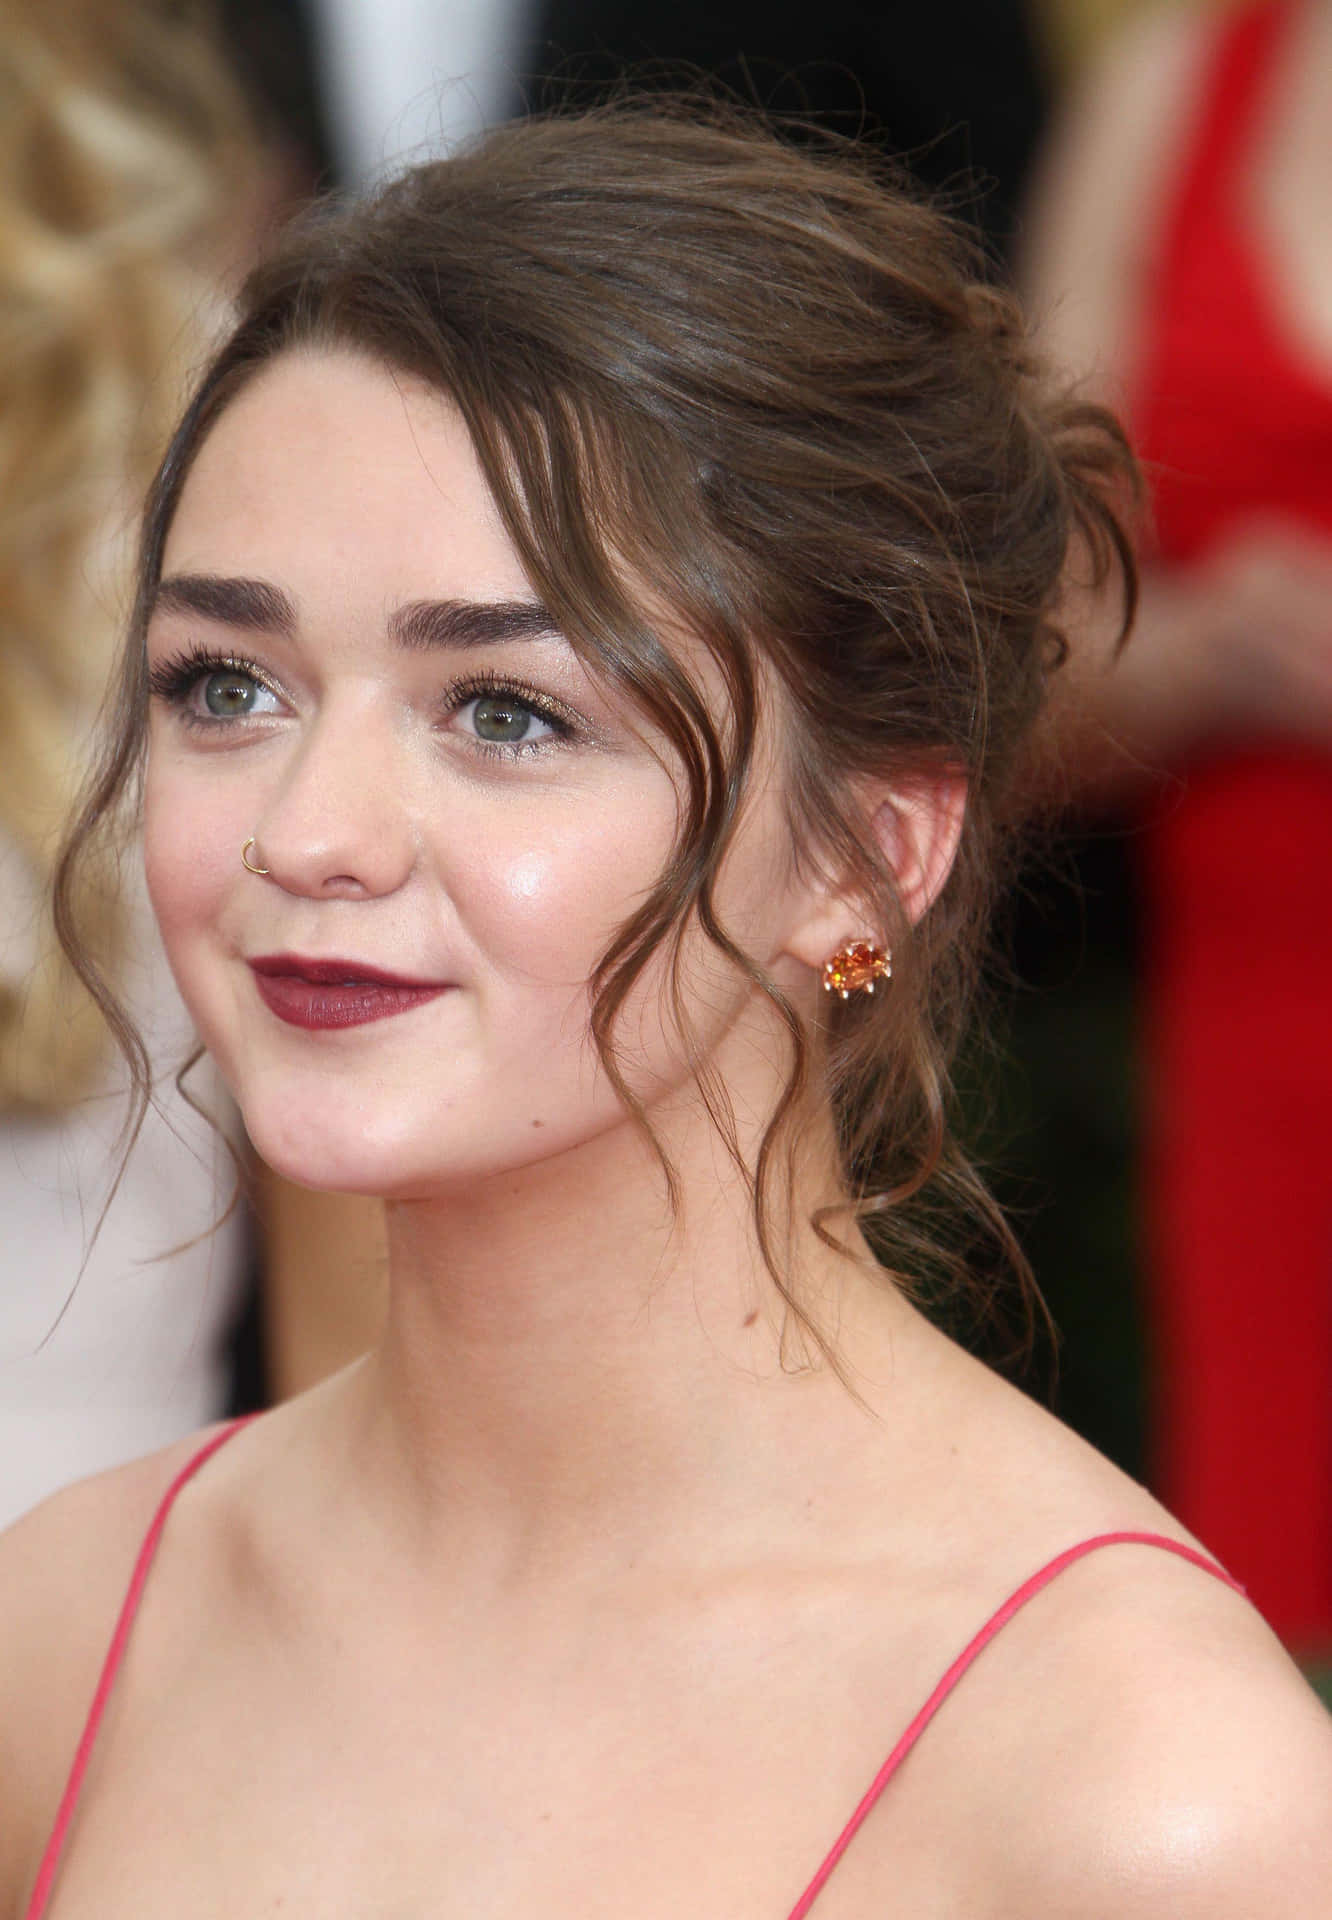 Enigmatic Maisie Williams Posing Elegantly During A Photoshoot. Wallpaper